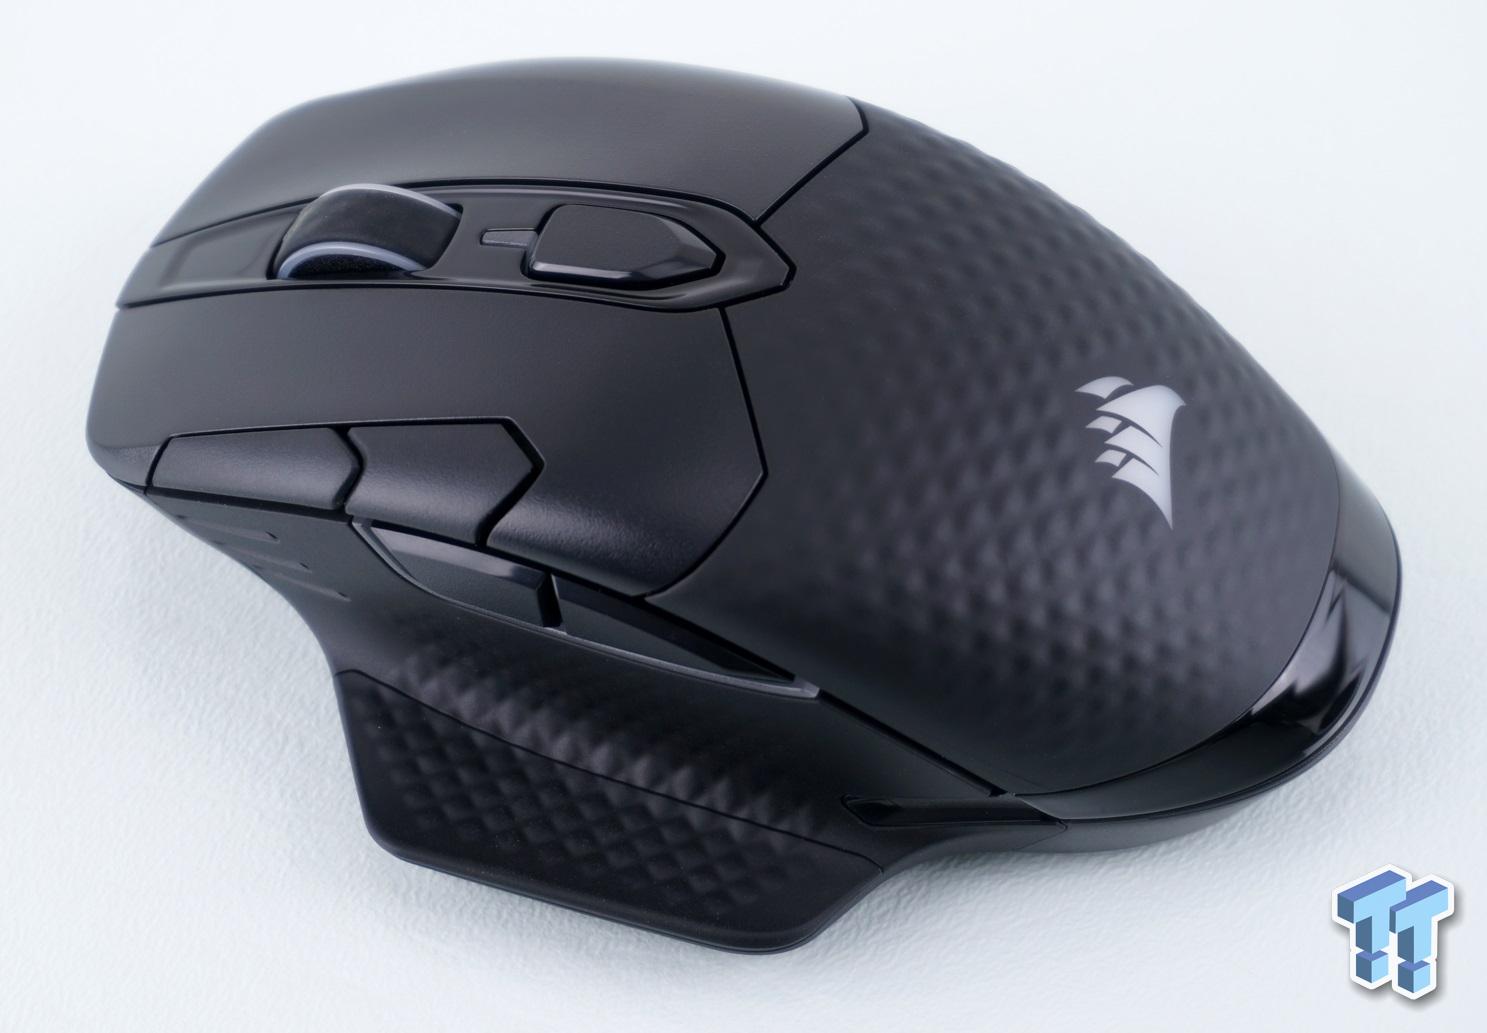 Some semi in-depth thoughts on the Endgame mice and XM2WE first